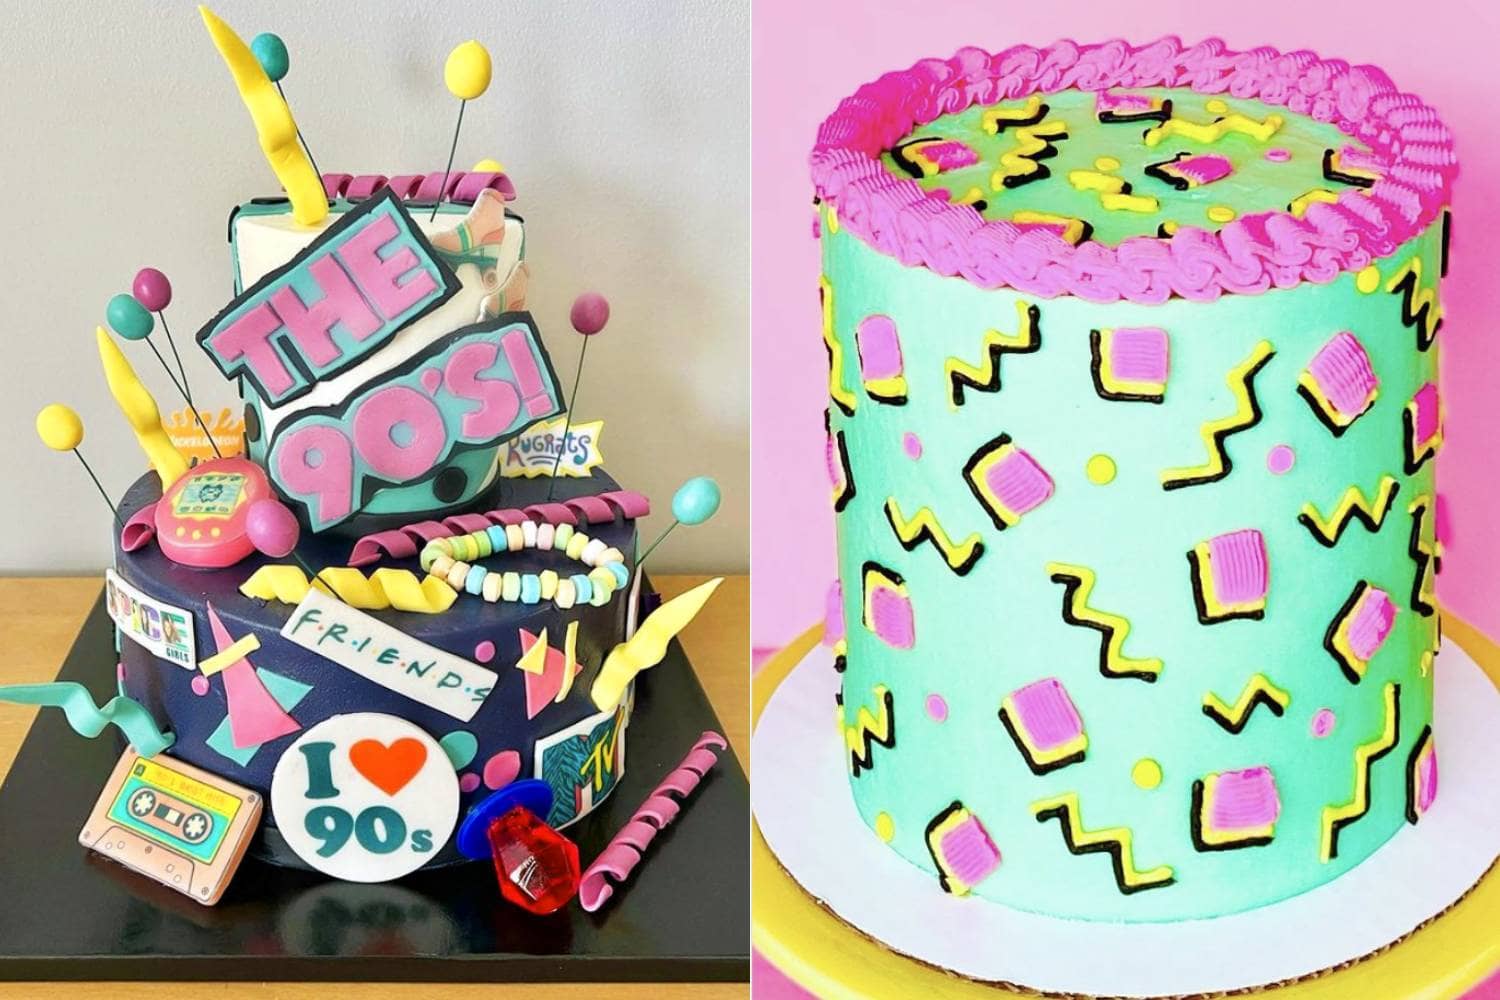 Use These 90s Cake Ideas For Your Next Party - Let's Eat Cake